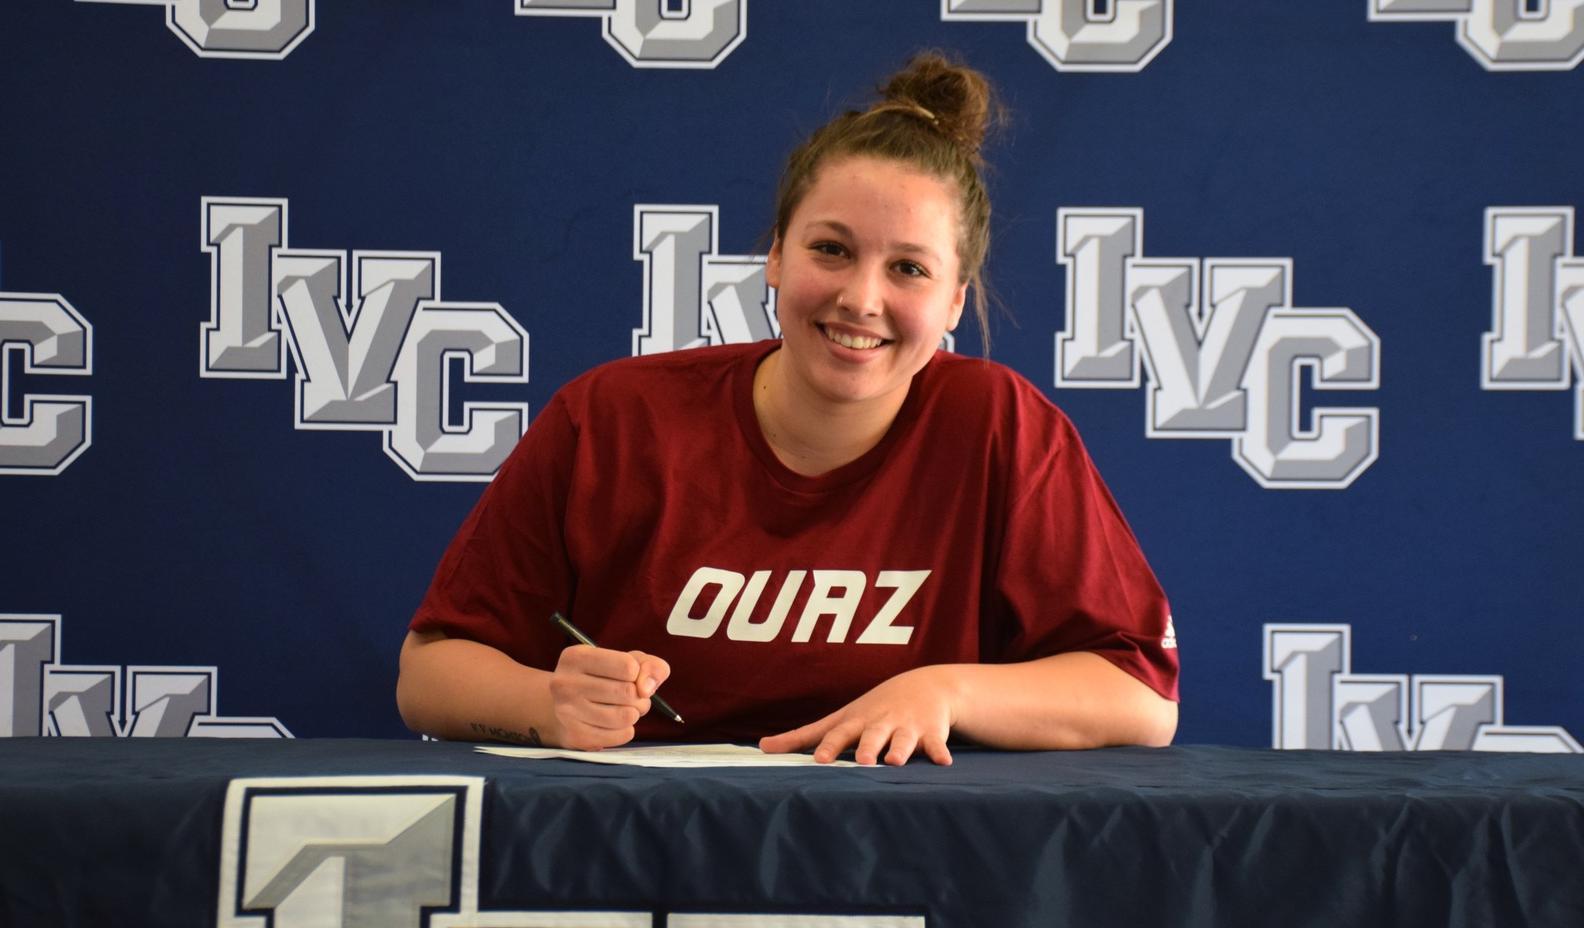 Women's basketball player Jenna Rodriguez signs with OUAZ